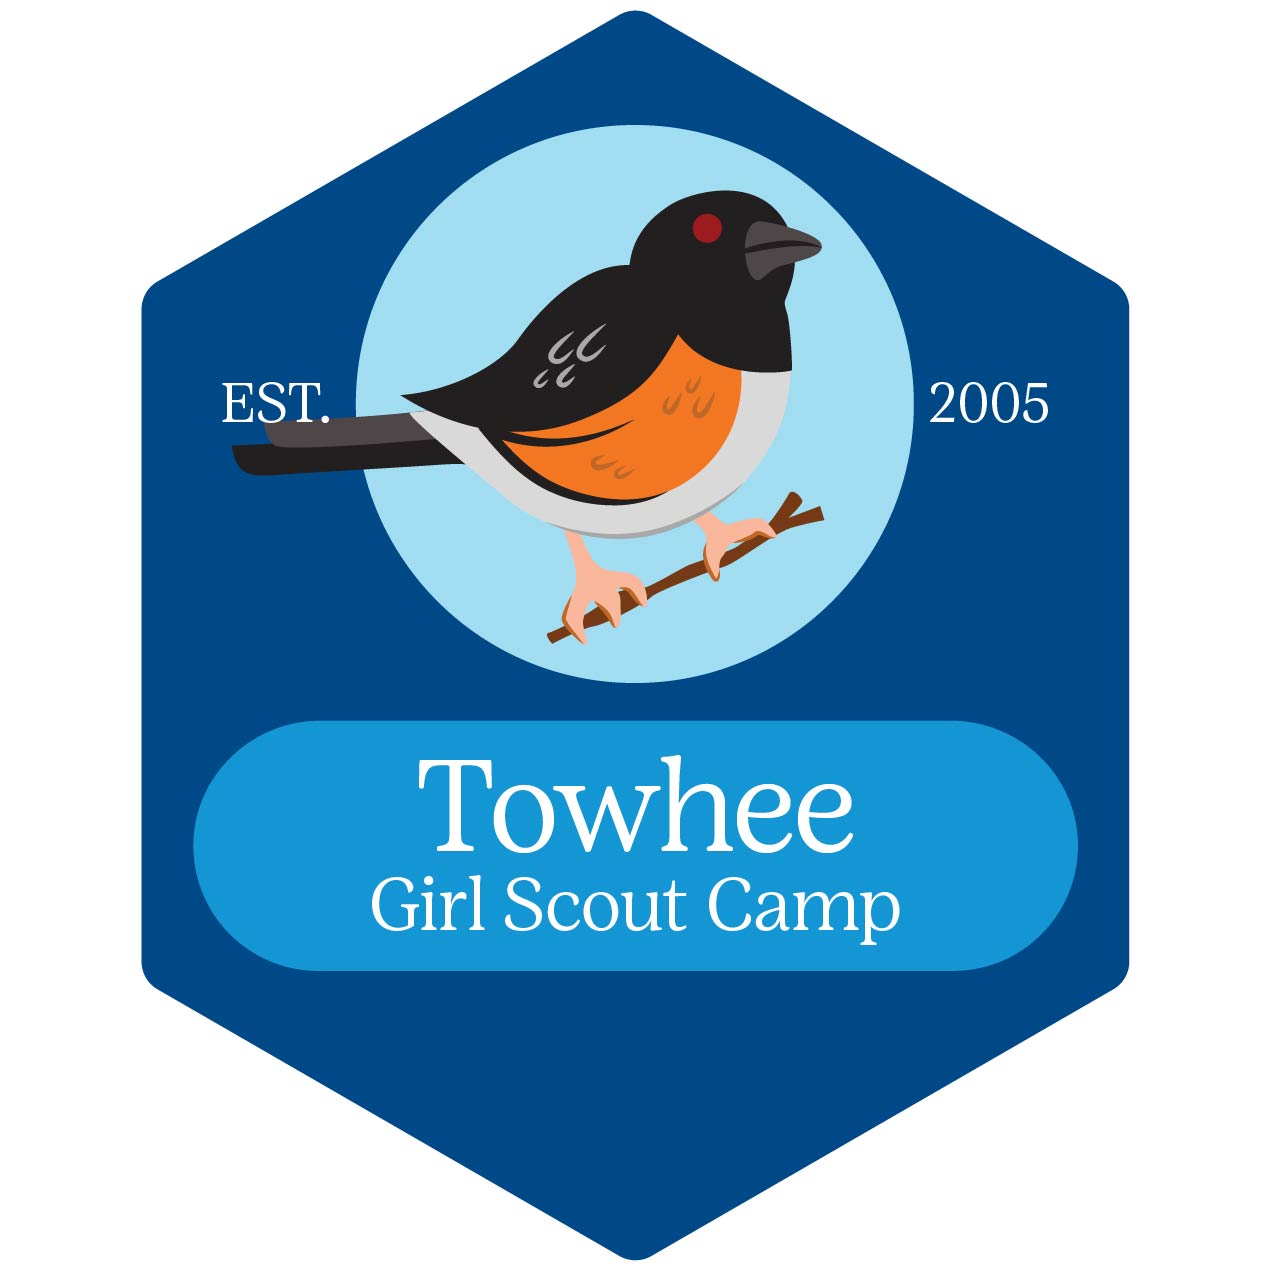 An illustration of a black and brown bird on a branch is set against a blue shape. White text reads, "Towhee Girl Scout Camp. Est. 2005."